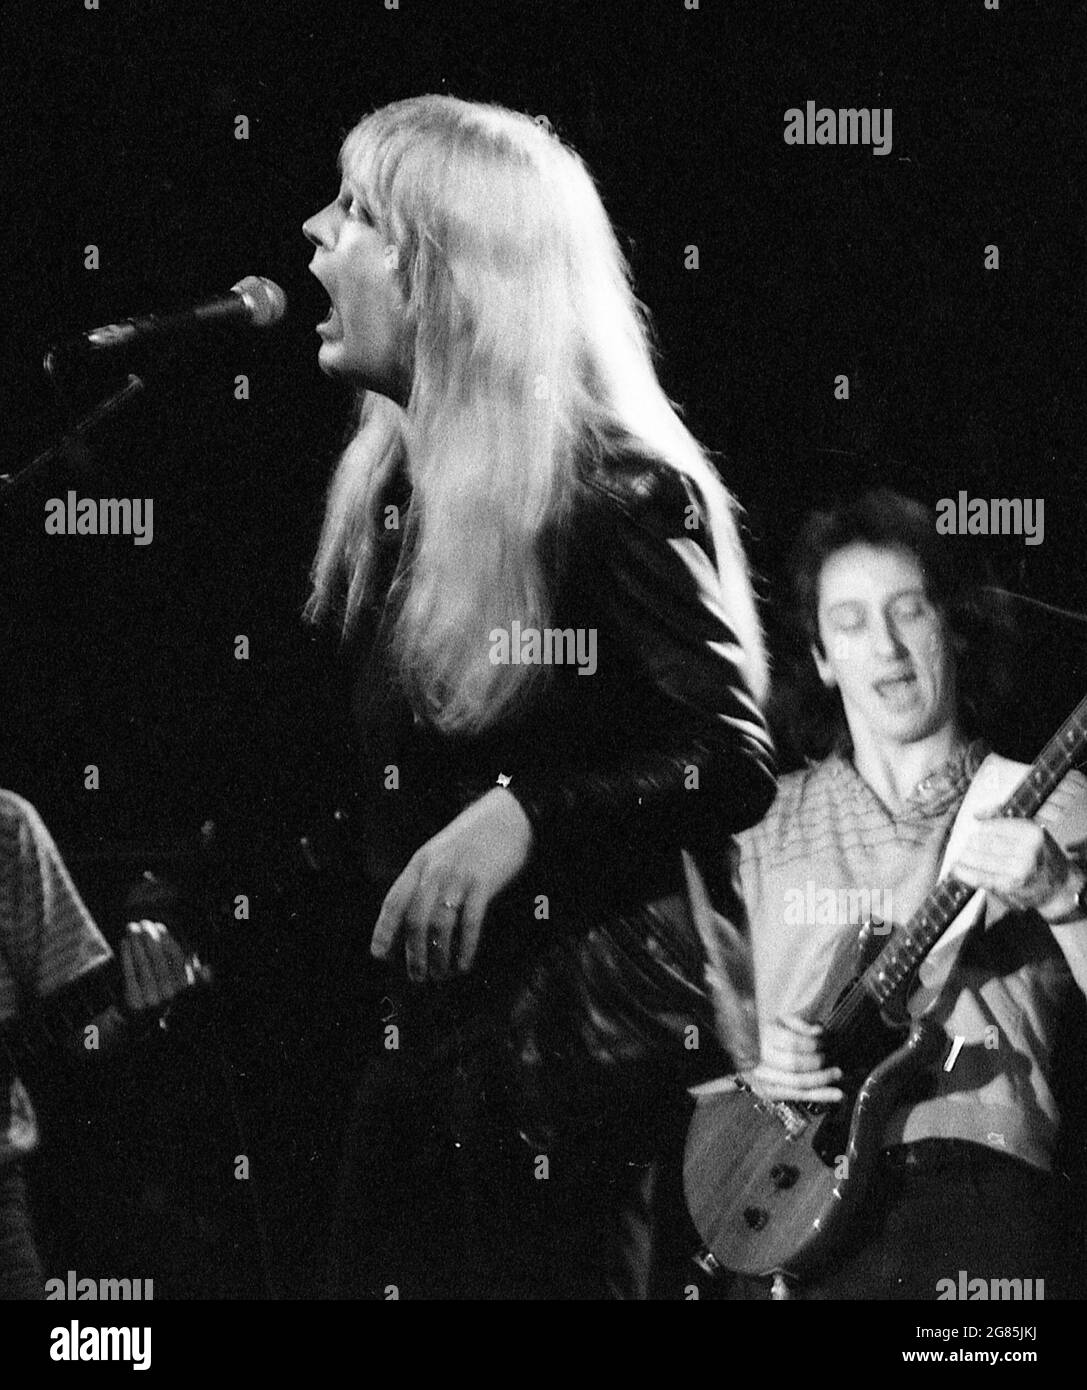 black and white image of Christian rock musician, Larry Norman, performing at a concert in Brisbane, Australia, December 1982 Stock Photo